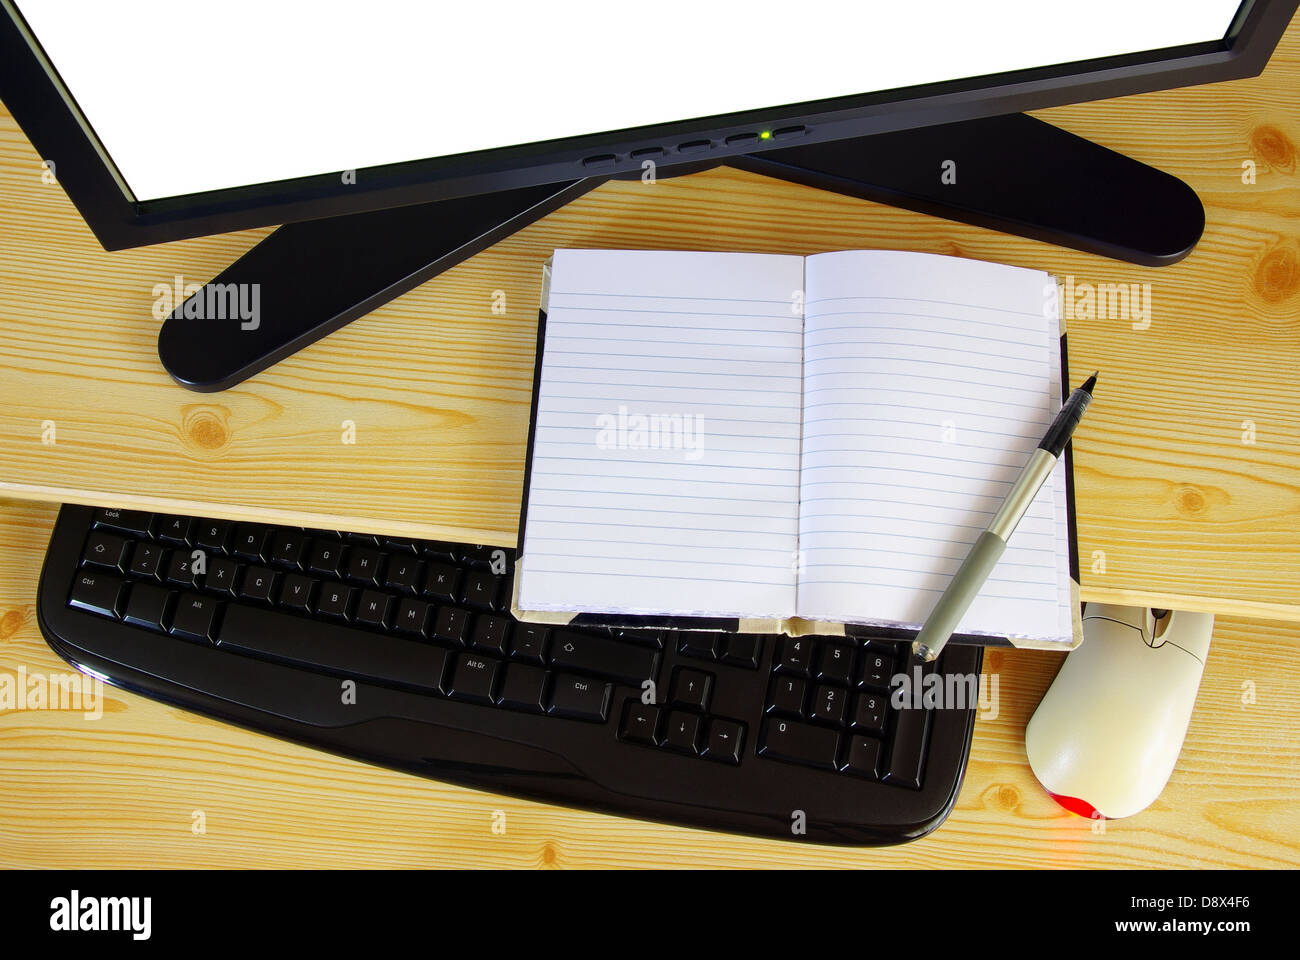 Computer desk with monitor, keyboard, mouse and an opened notebook and pen Stock Photo